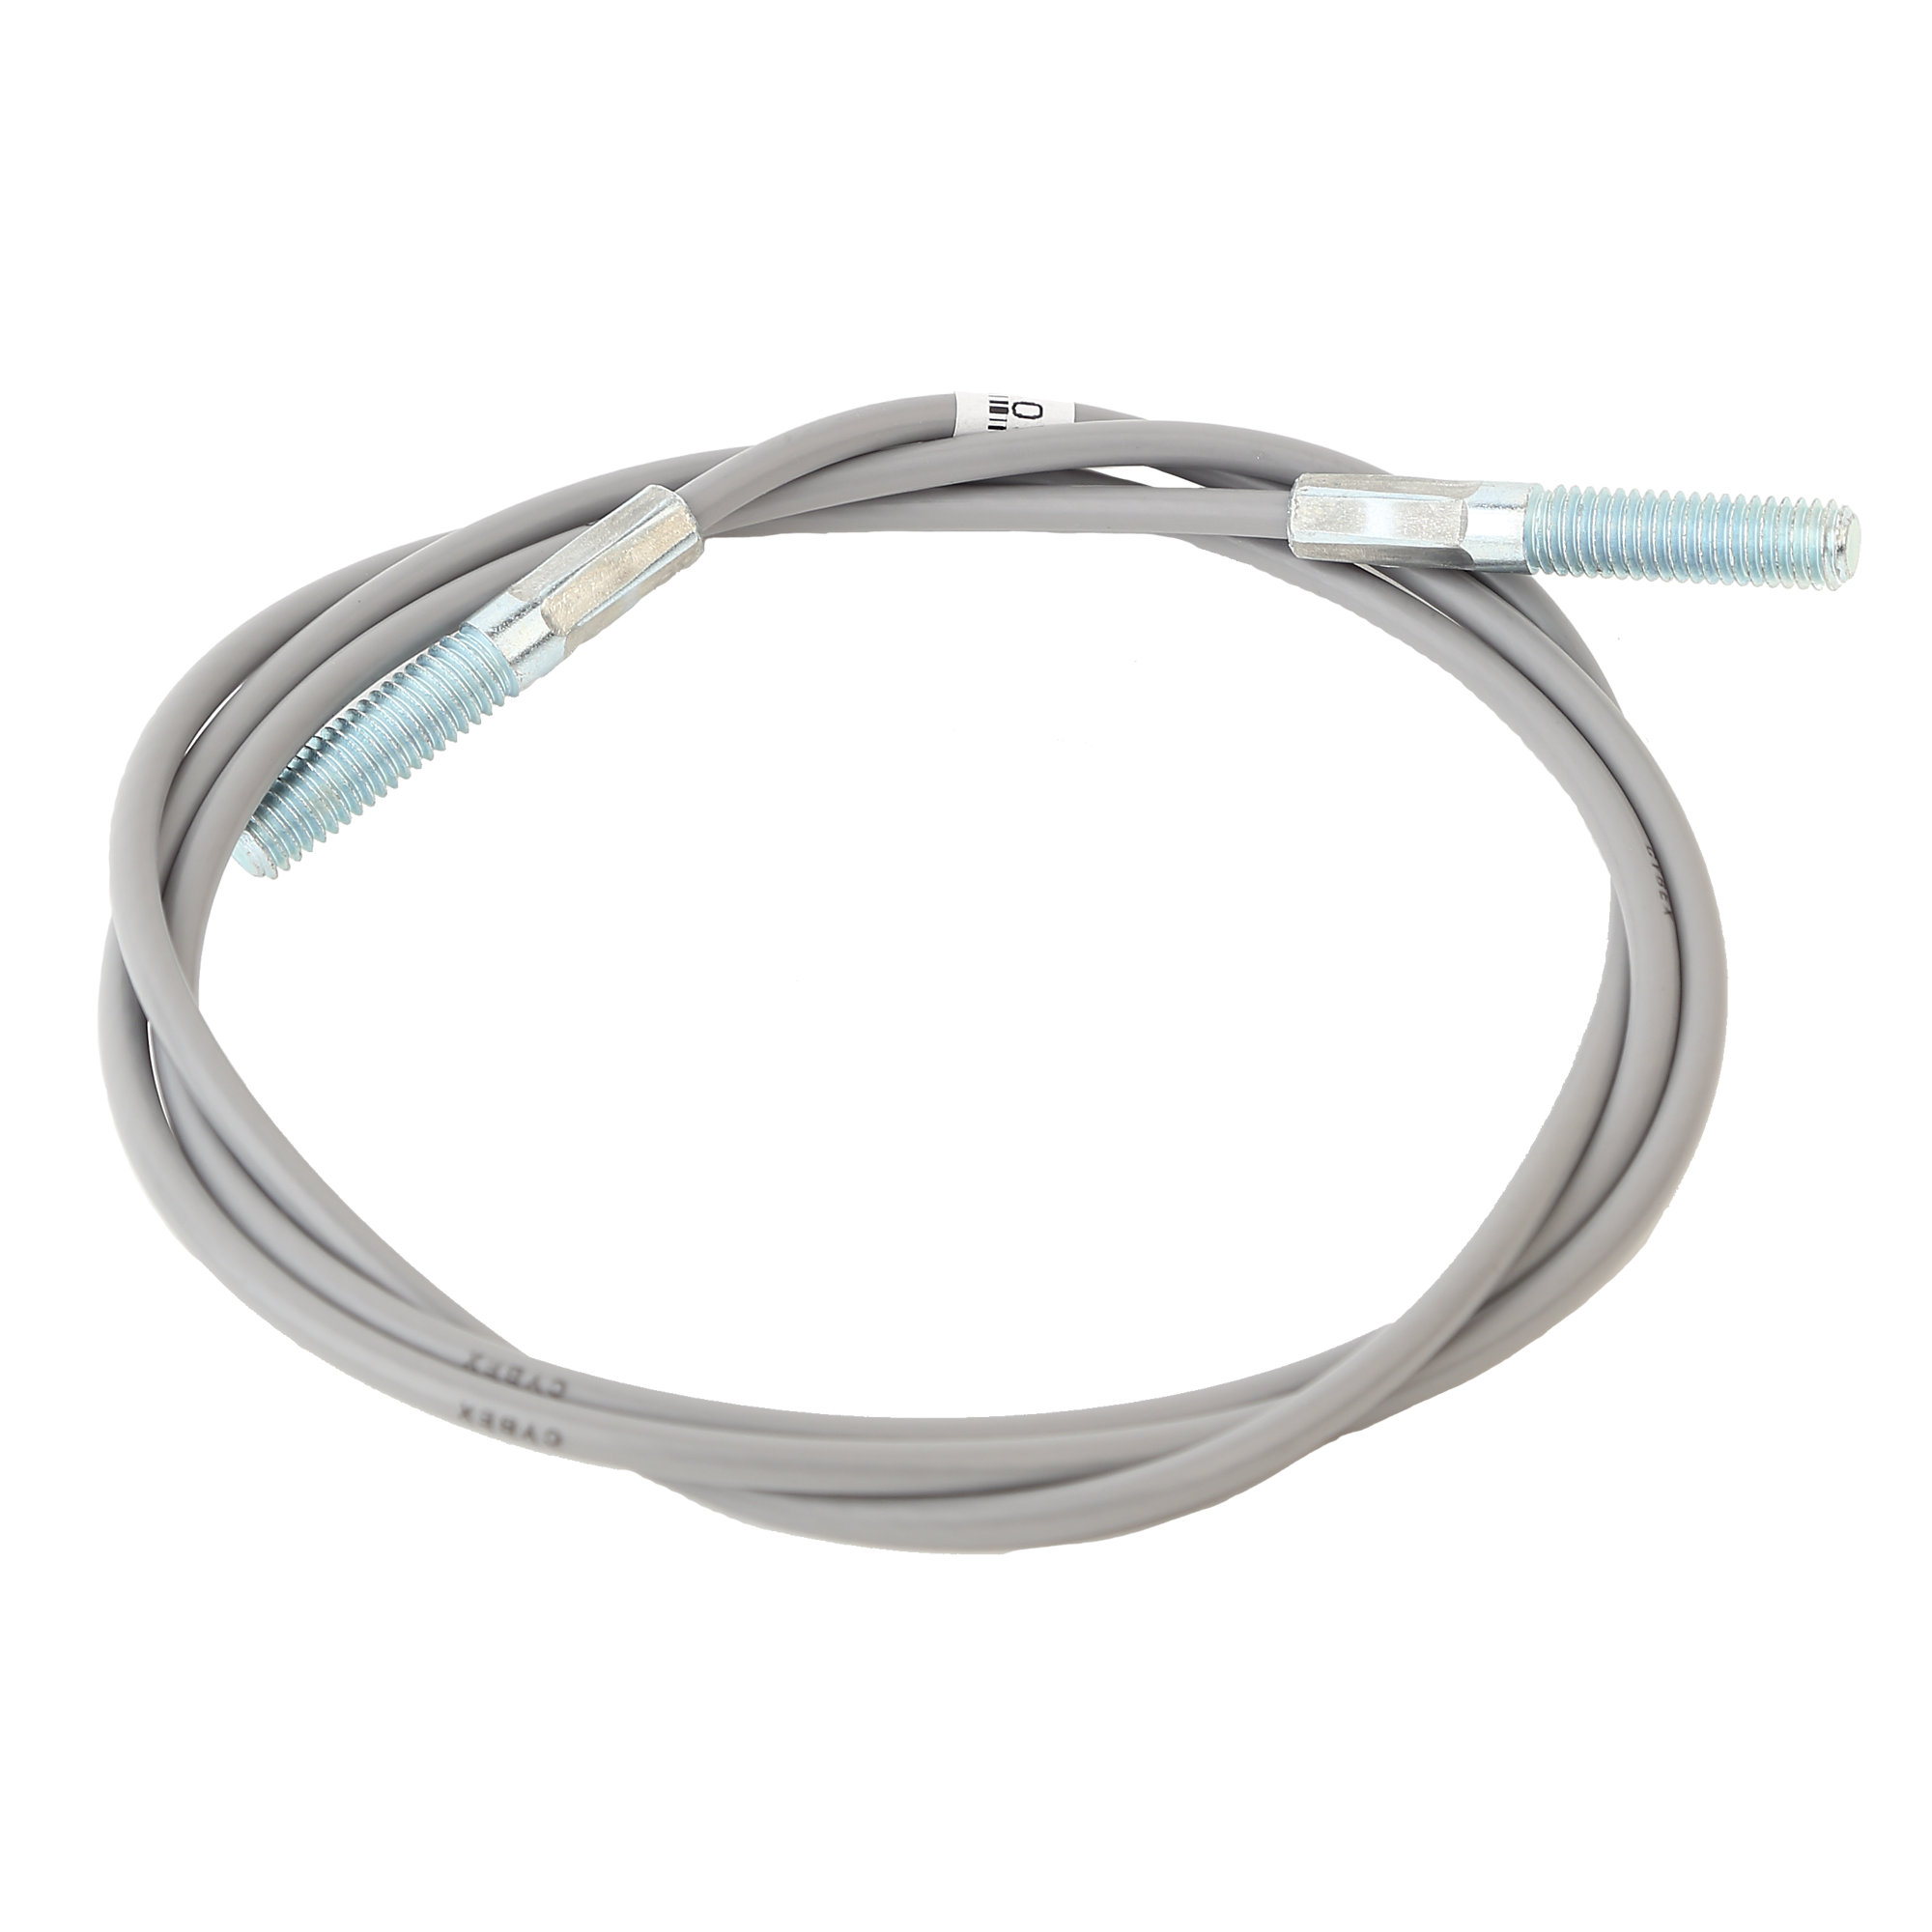 Cable for certain Strength Machines by Cybex 13180-002